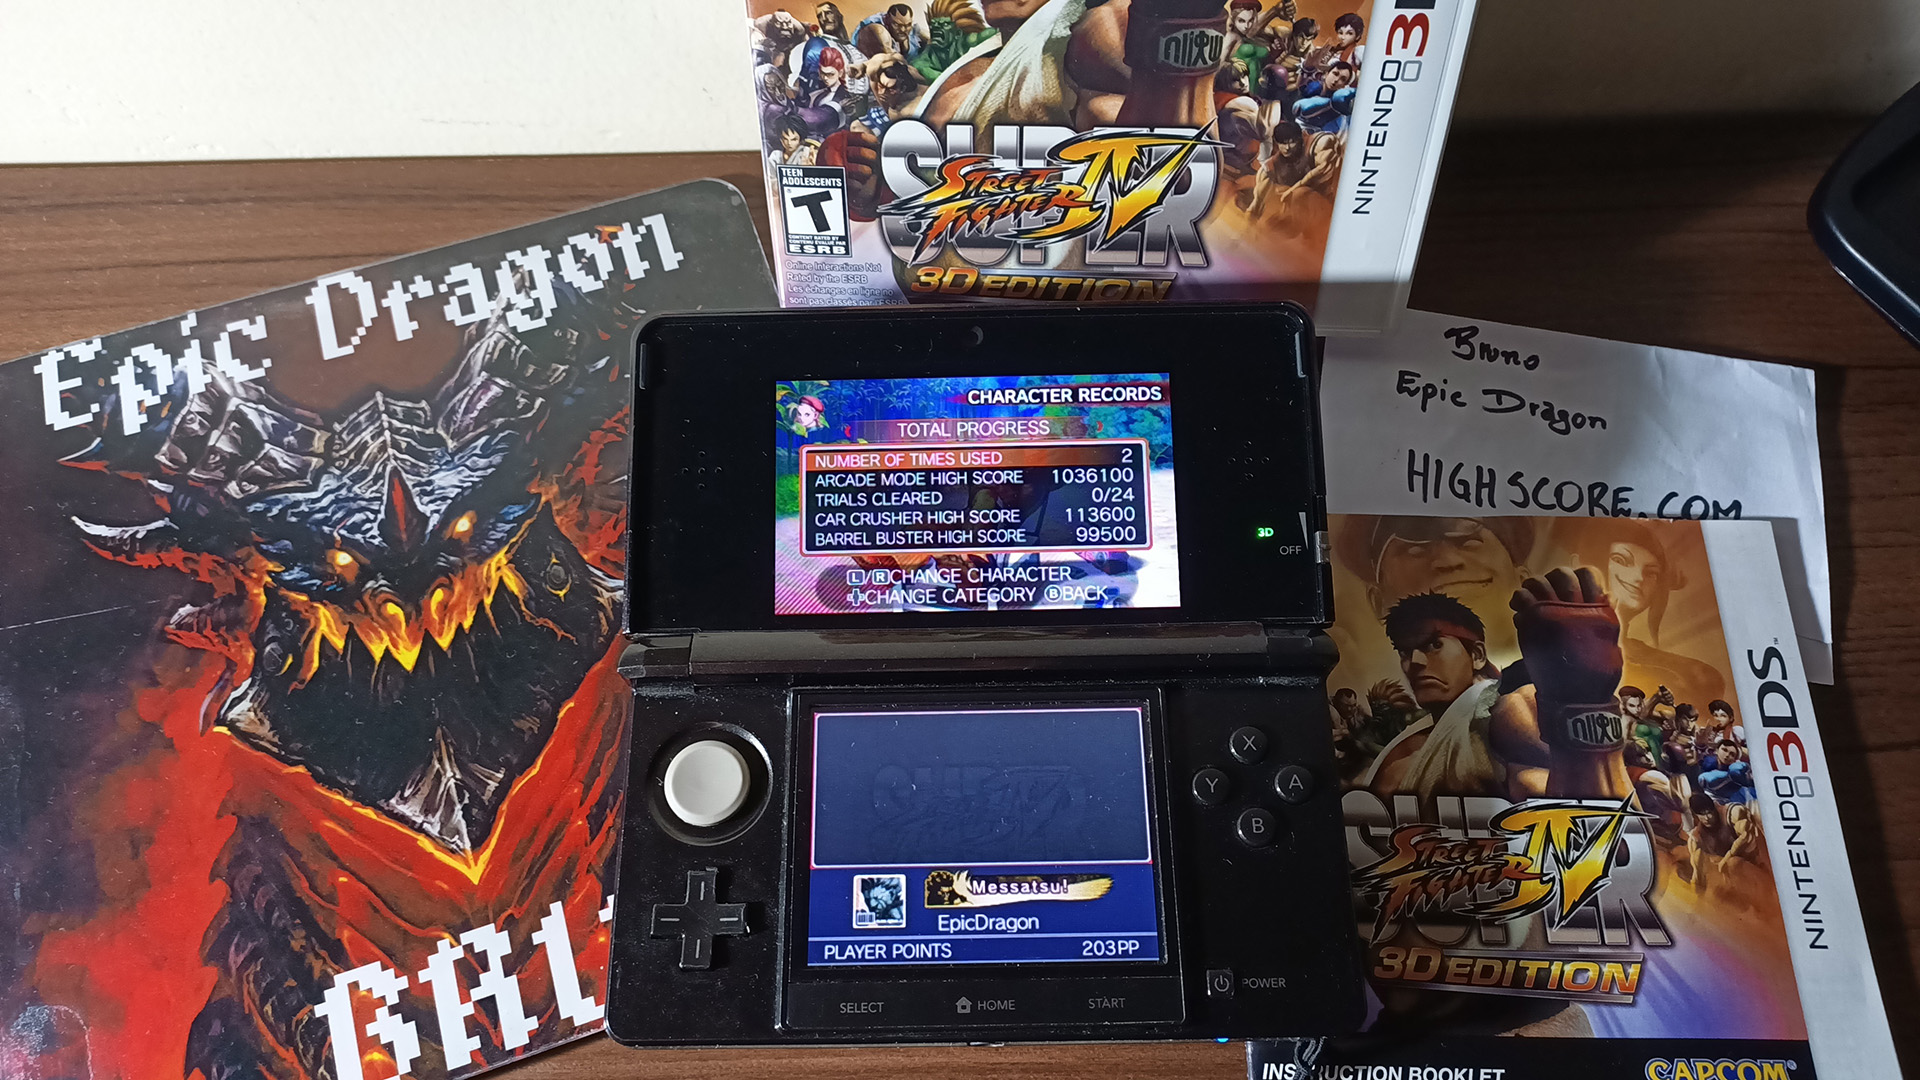 EpicDragon: Super Street Fighter IV 3D Edition: Challenge: Car Crusher: Cammy (Nintendo 3DS) 113,600 points on 2022-08-01 20:54:51